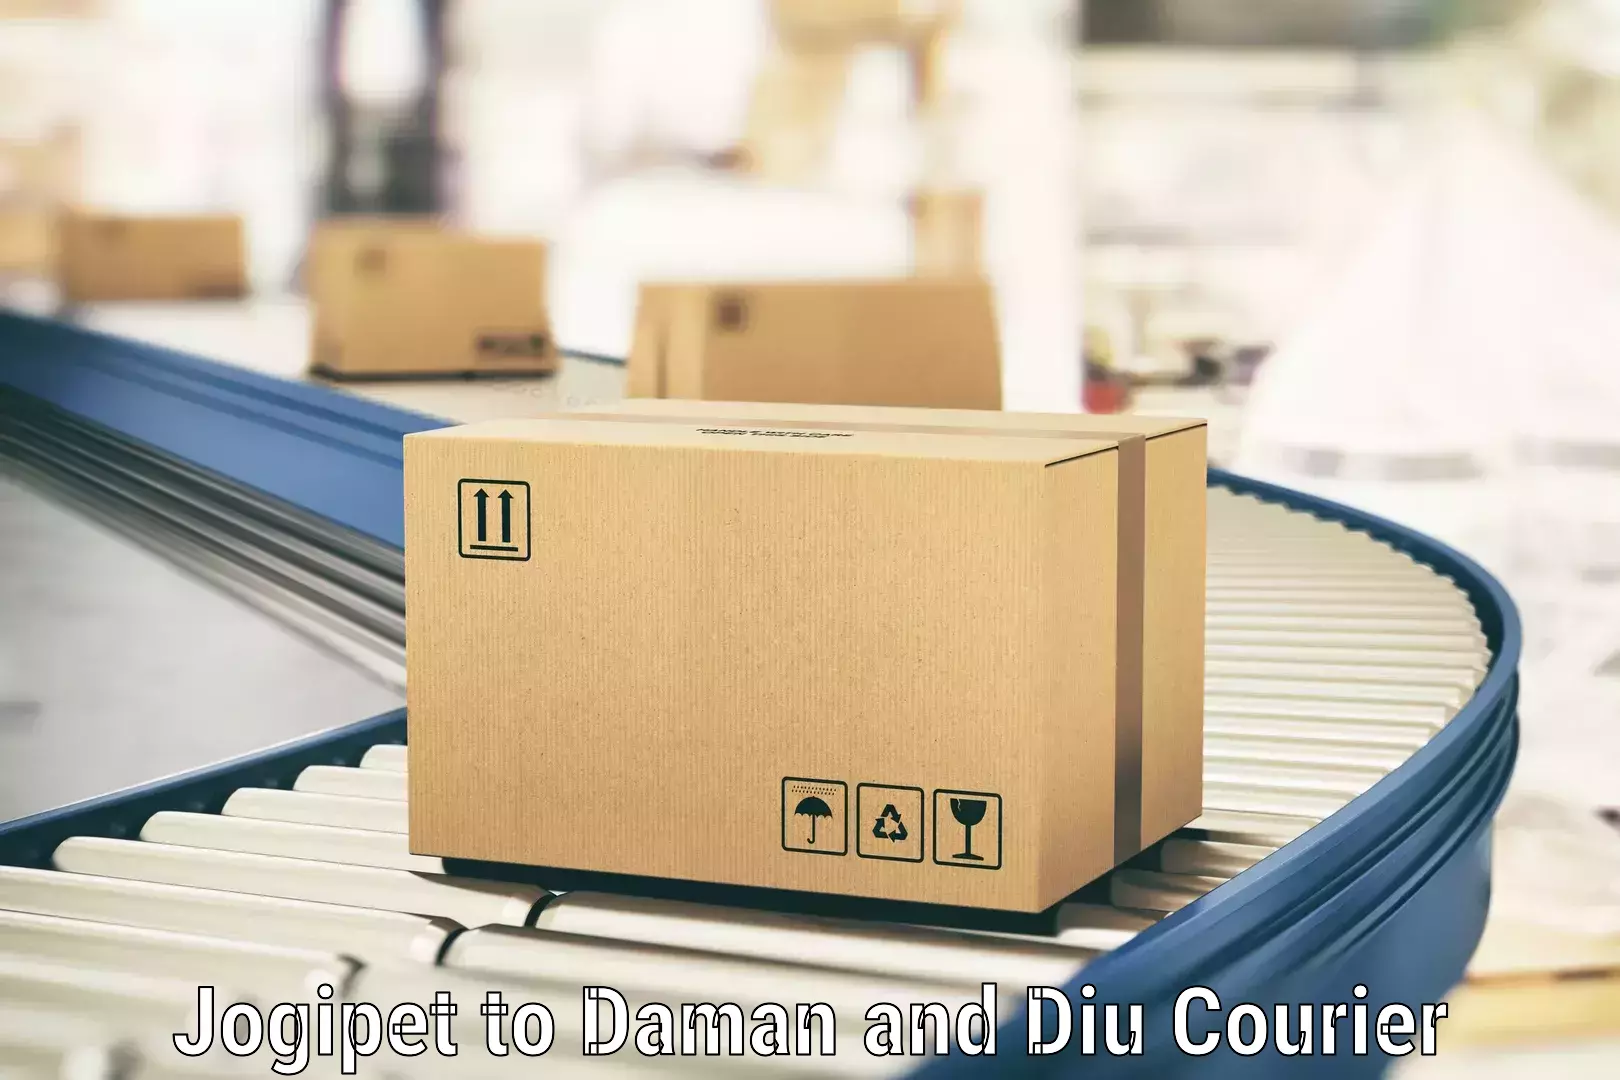 Cost-effective courier options Jogipet to Diu